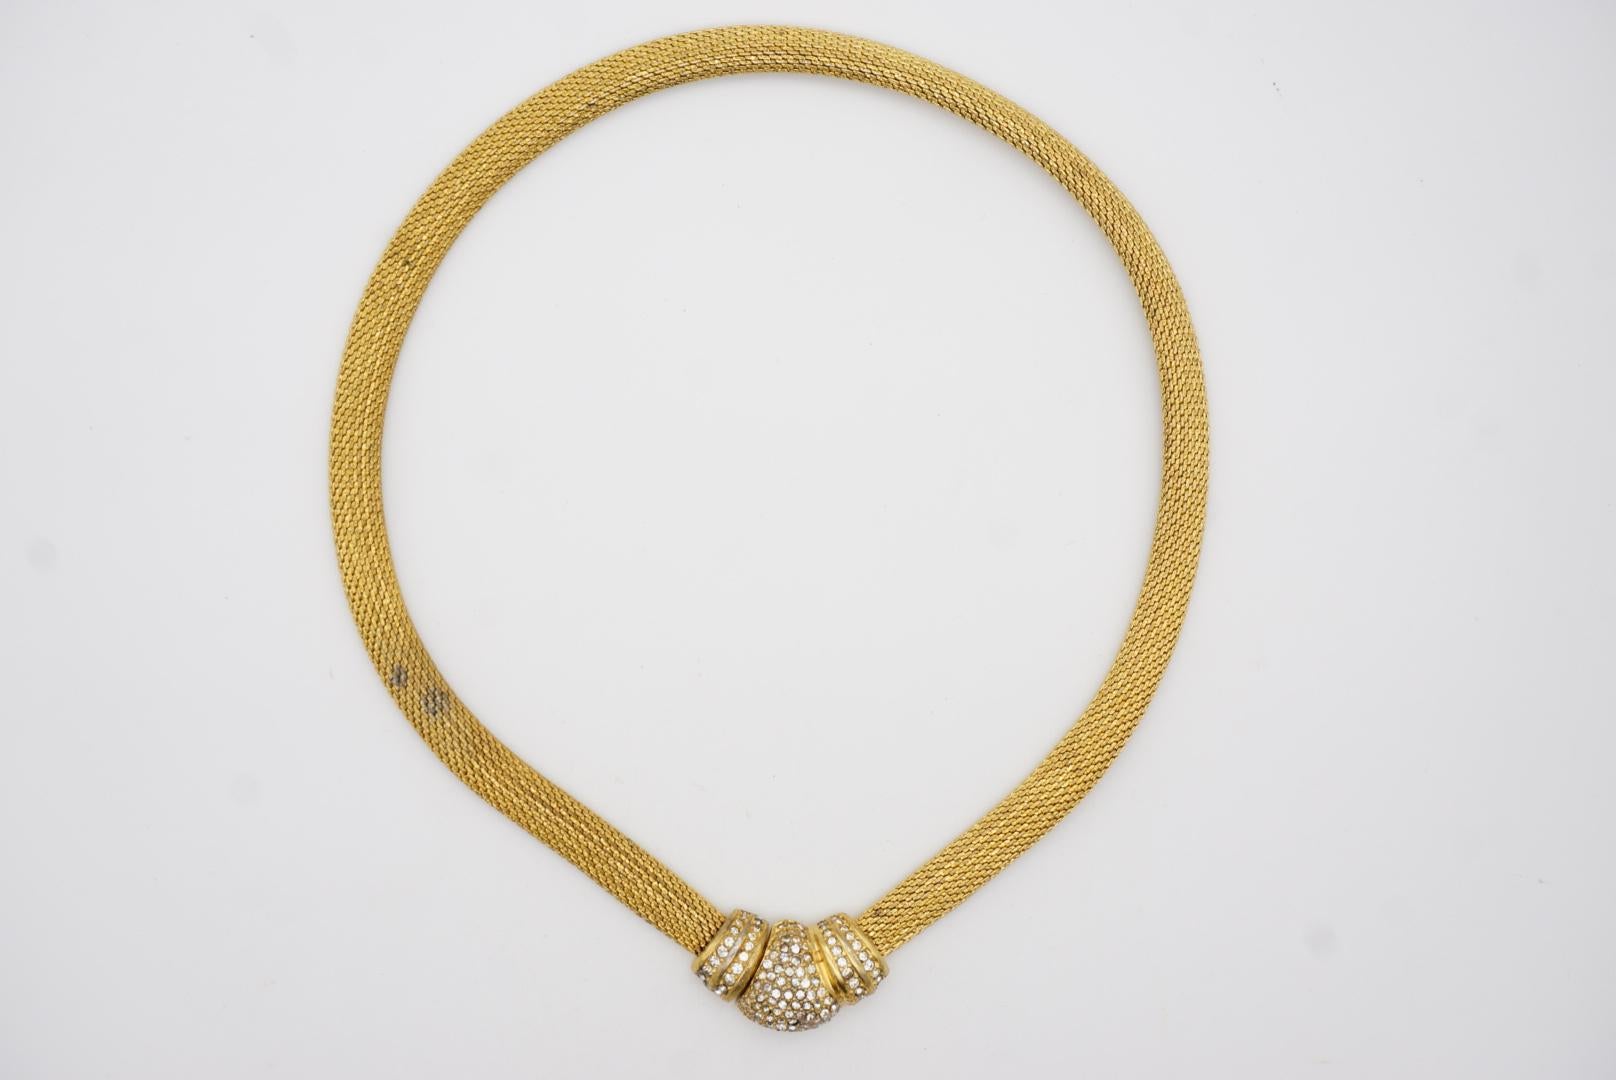 Christian Dior Vintage 1980s Whole Crystals Button Snake Omega Gold Necklace In Good Condition For Sale In Wokingham, England